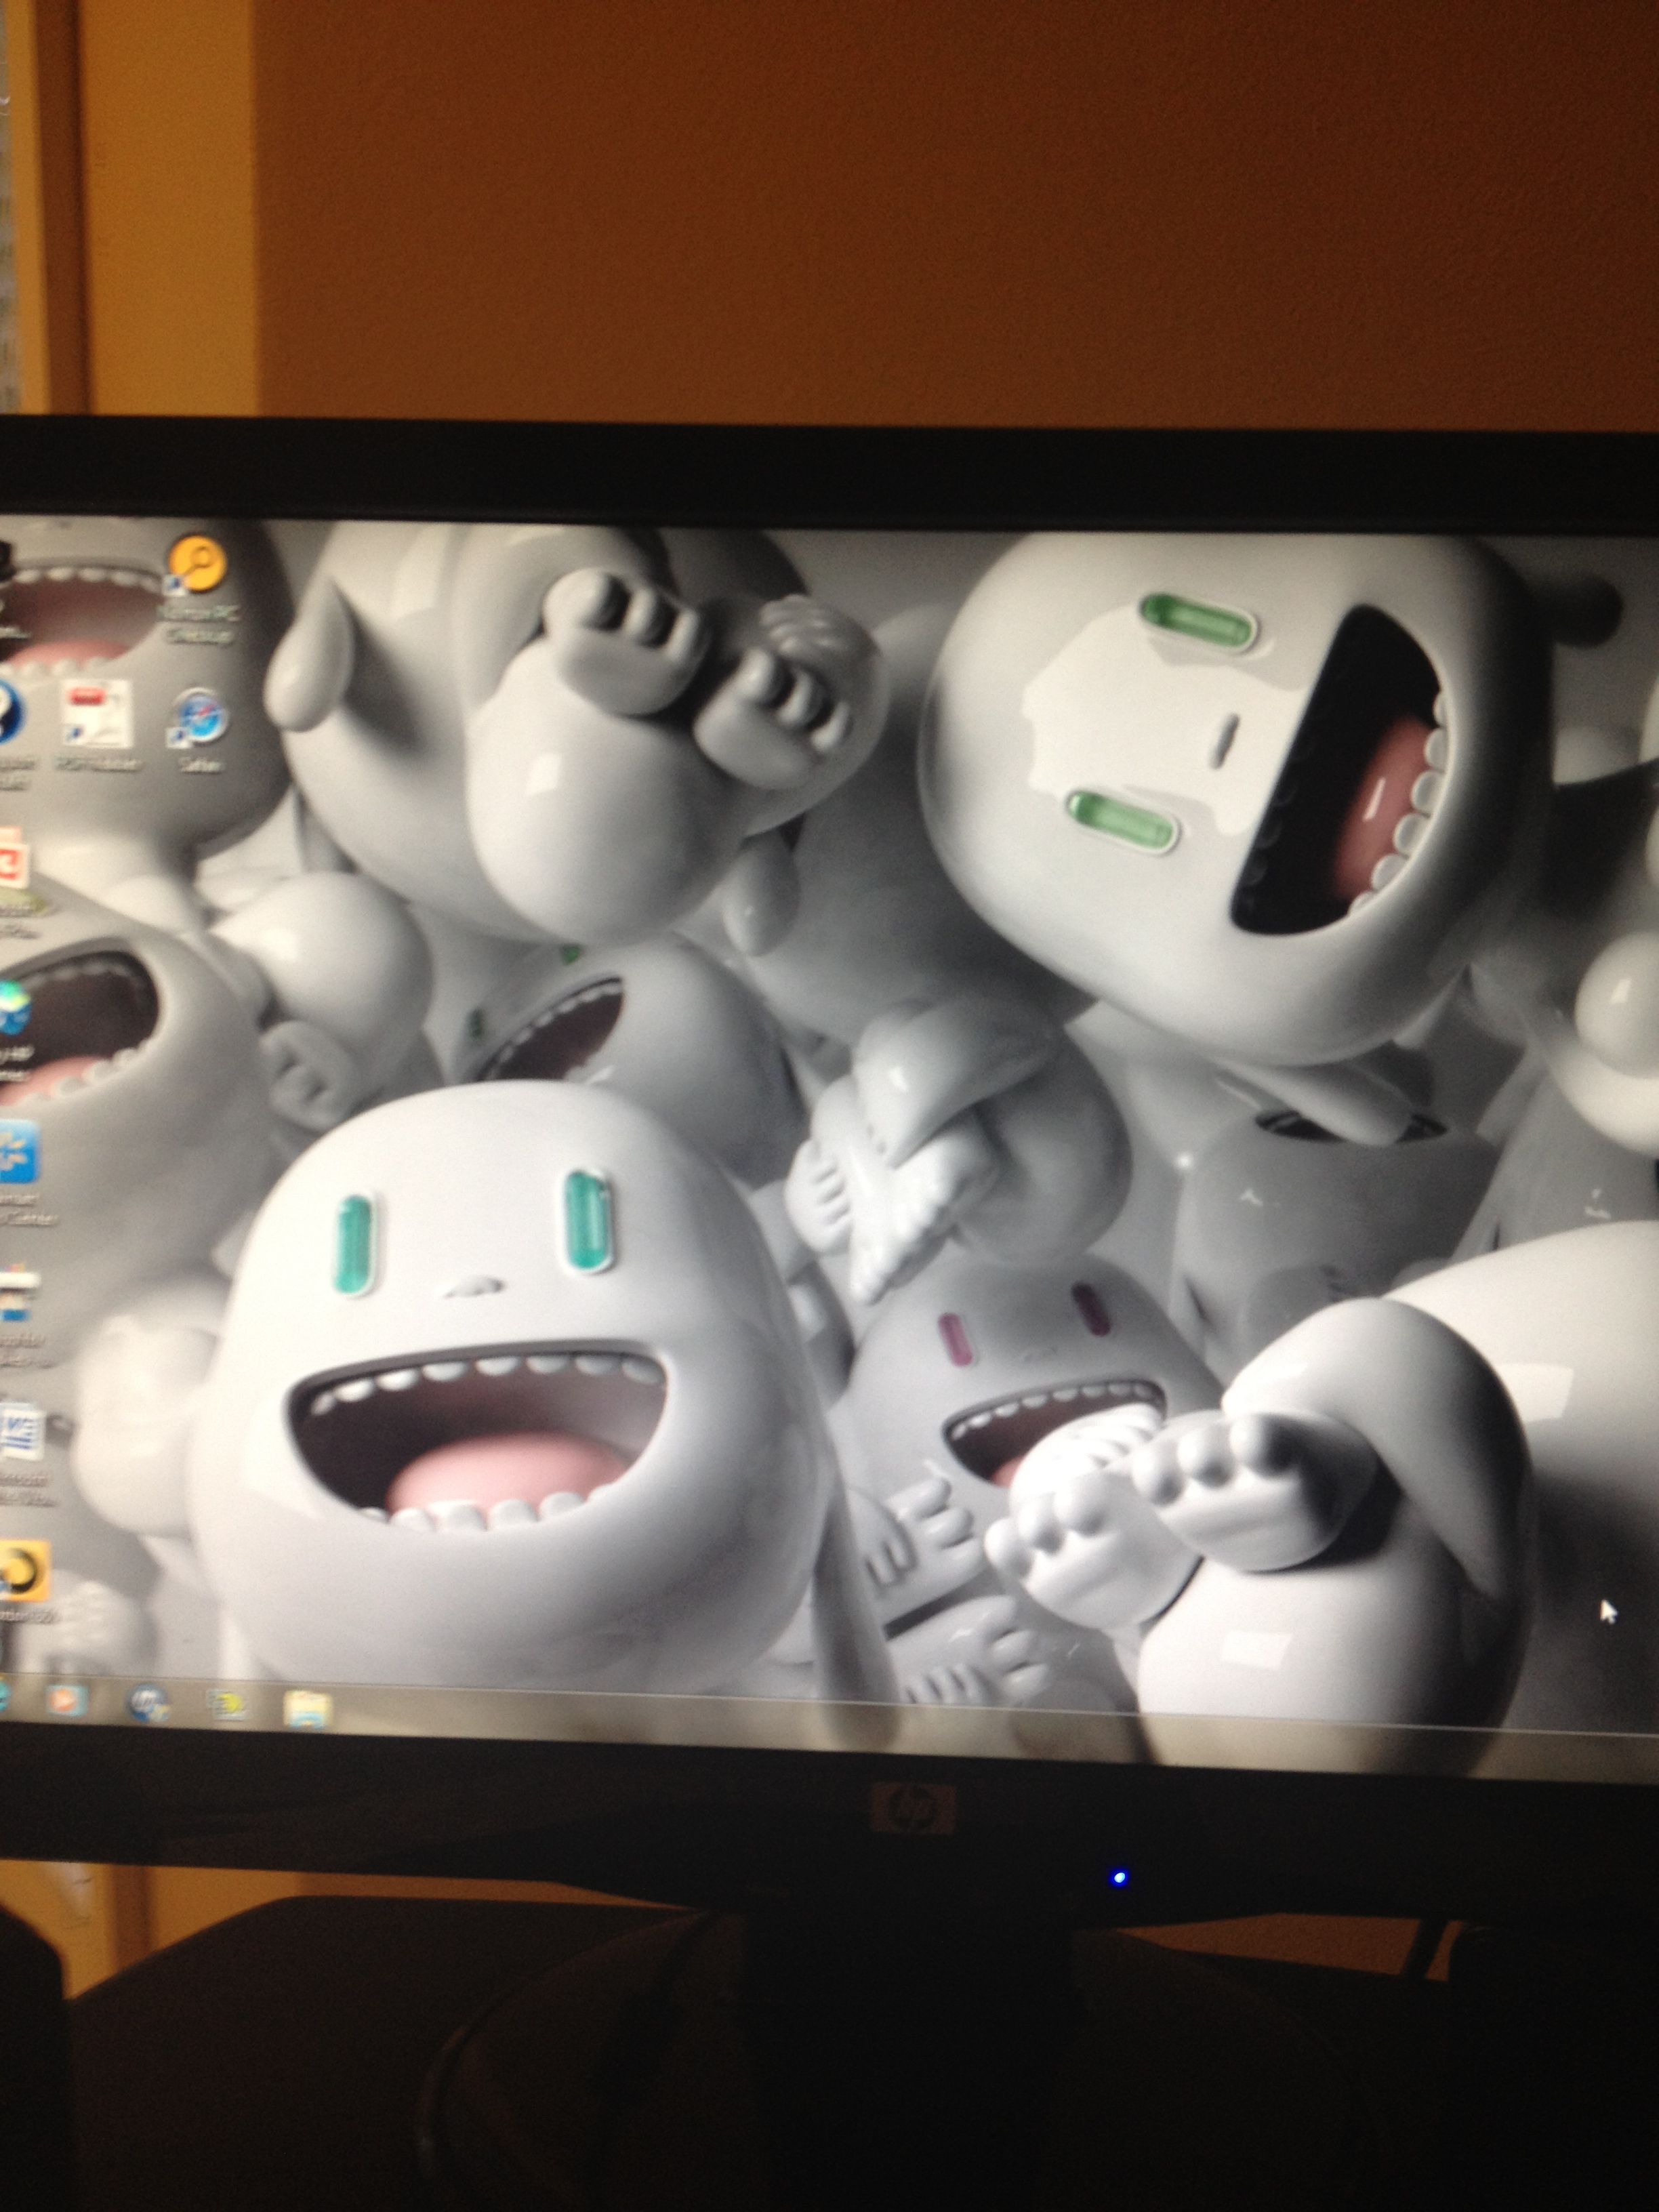 I Am Afraid Of This Screen Saver On The Puter Cool Wallpaper